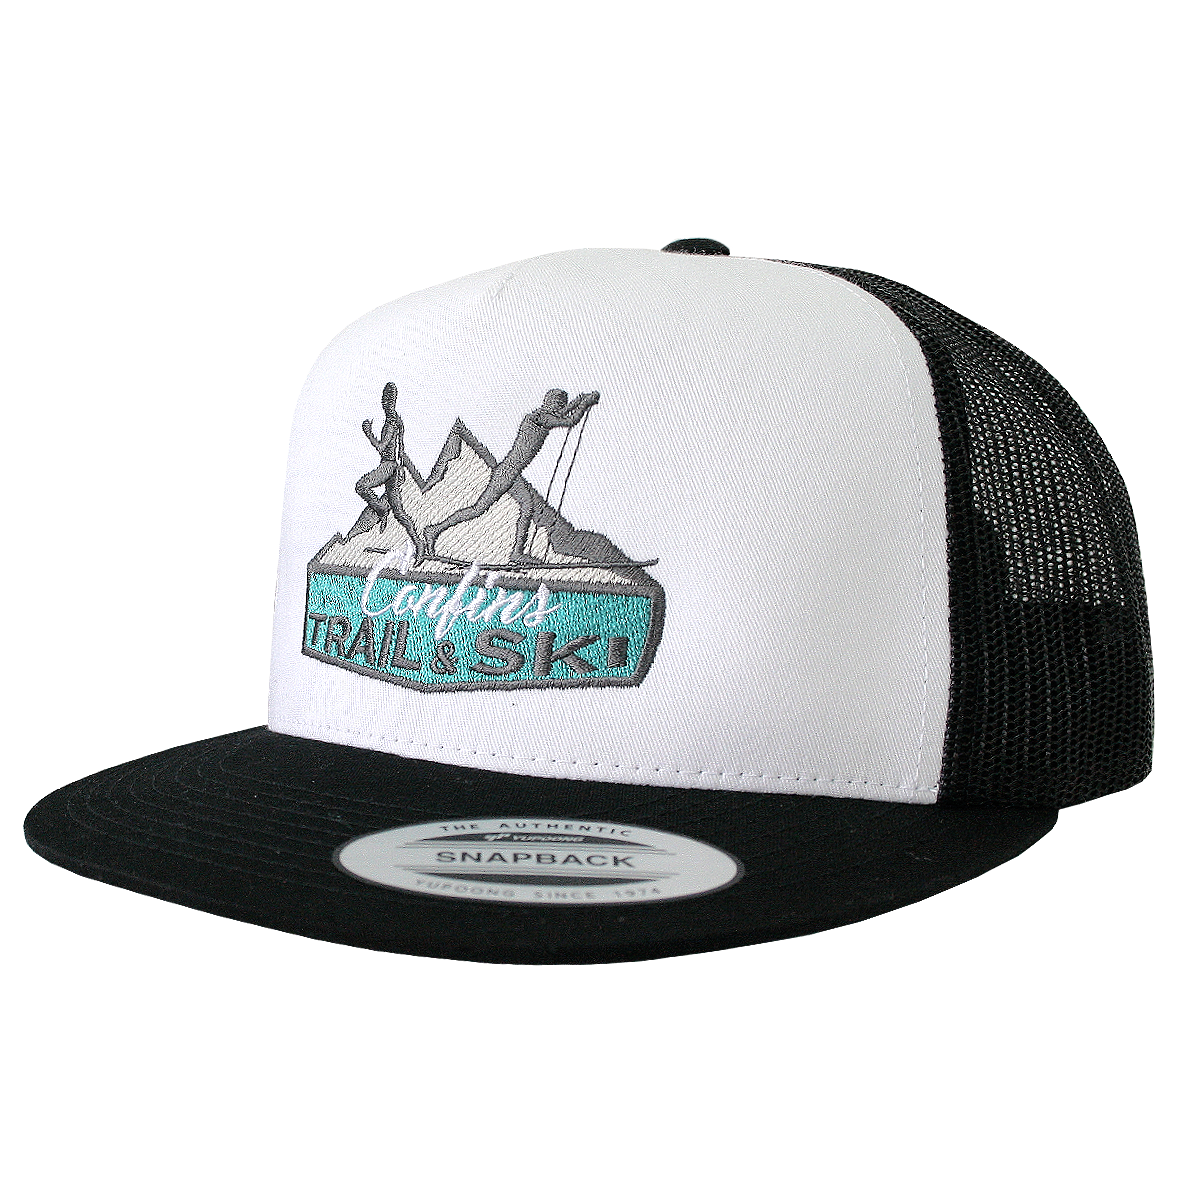 https://www.casquette-print.fr/wp-content/uploads/2022/03/CASQUETTE-TRUCKER-Yupoong-Front-tissu-personnalisee-6006-2.png